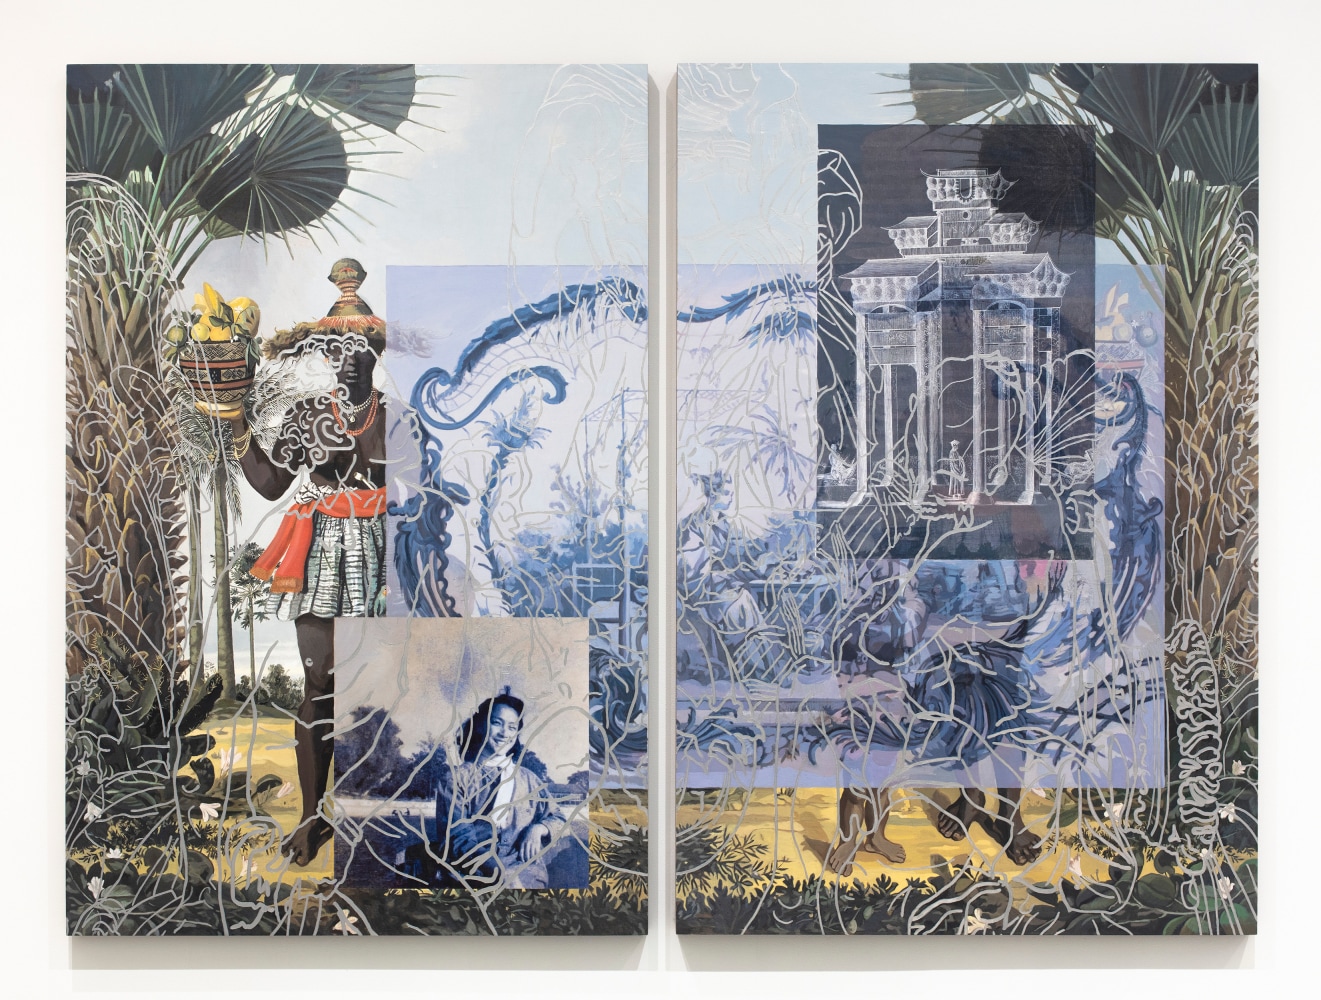 Diptych executed with two separate wood panels featuring a combination of images, mythical figures, plant life, and images overlay or on top of drawing and painting